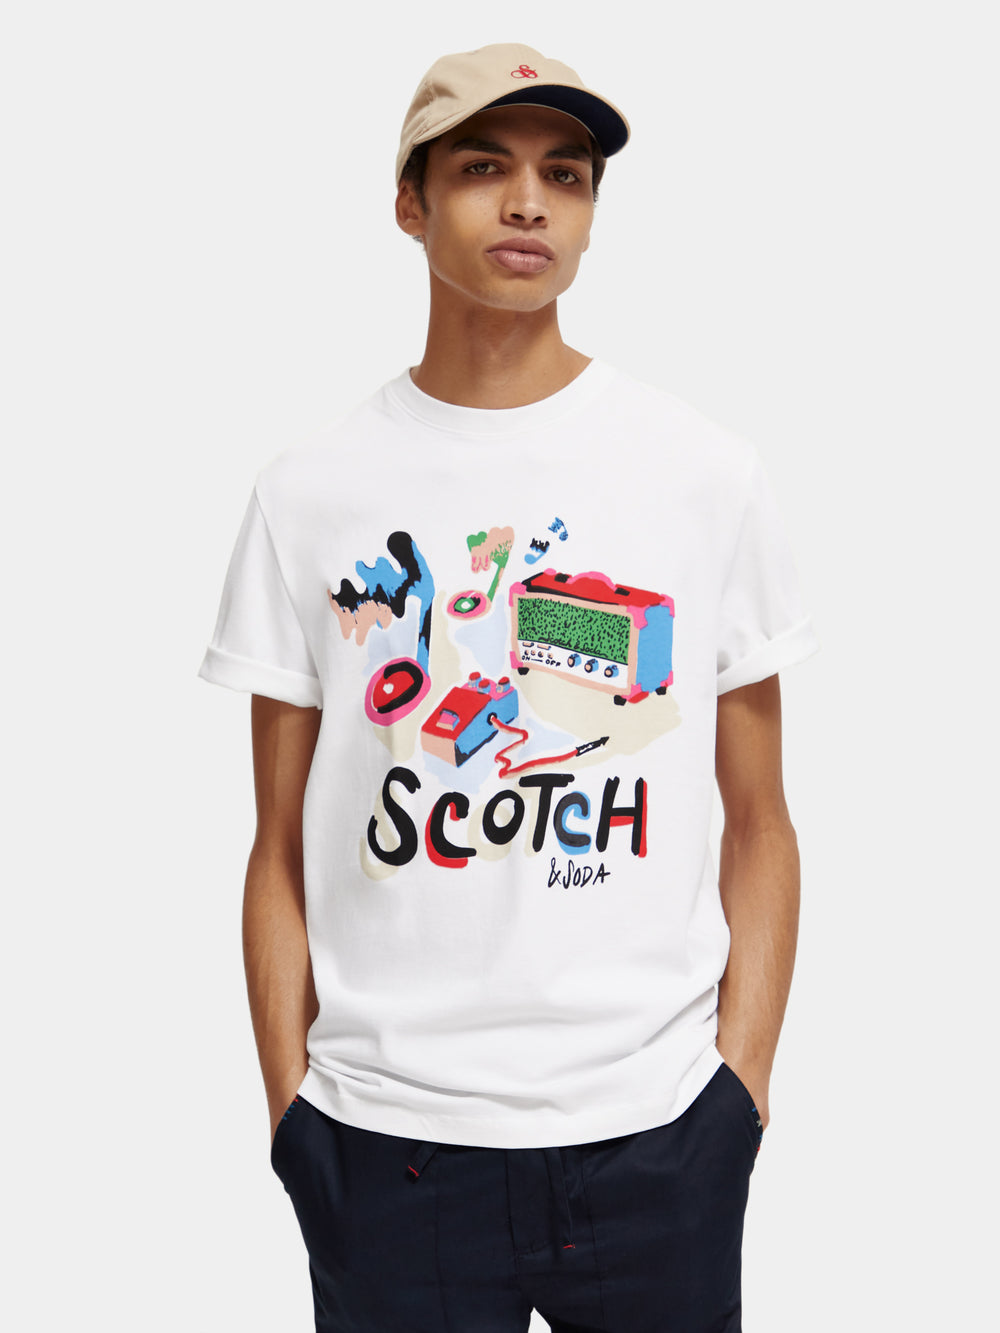 Relaxed-fit printed t-shirt - Scotch & Soda AU